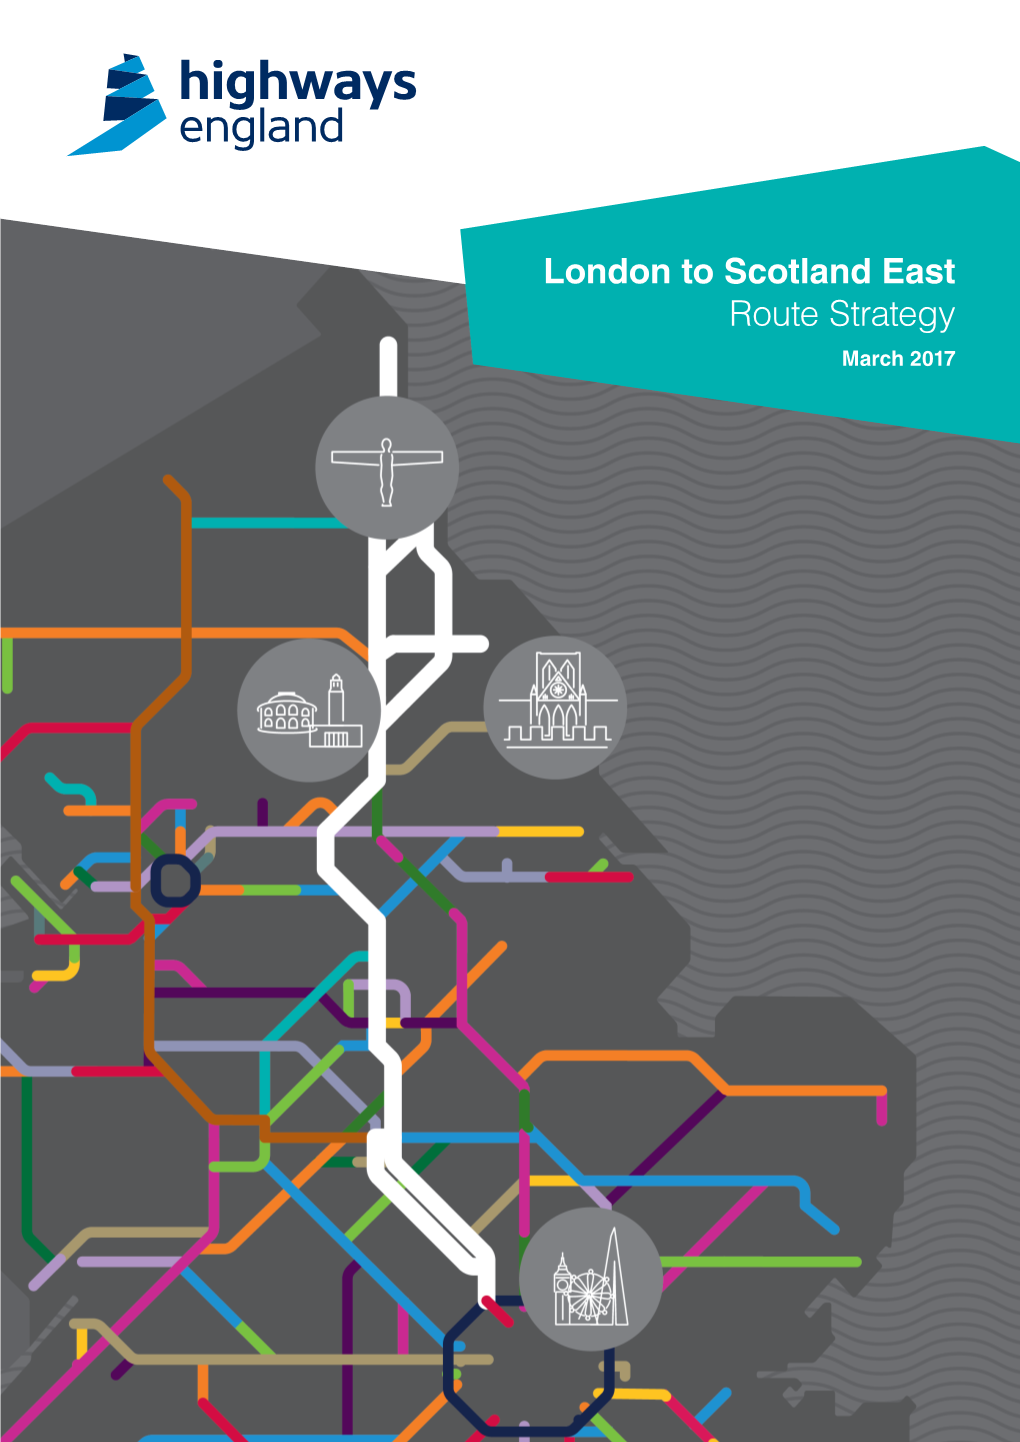 London to Scotland East Route Strategy March 2017 Contents 1